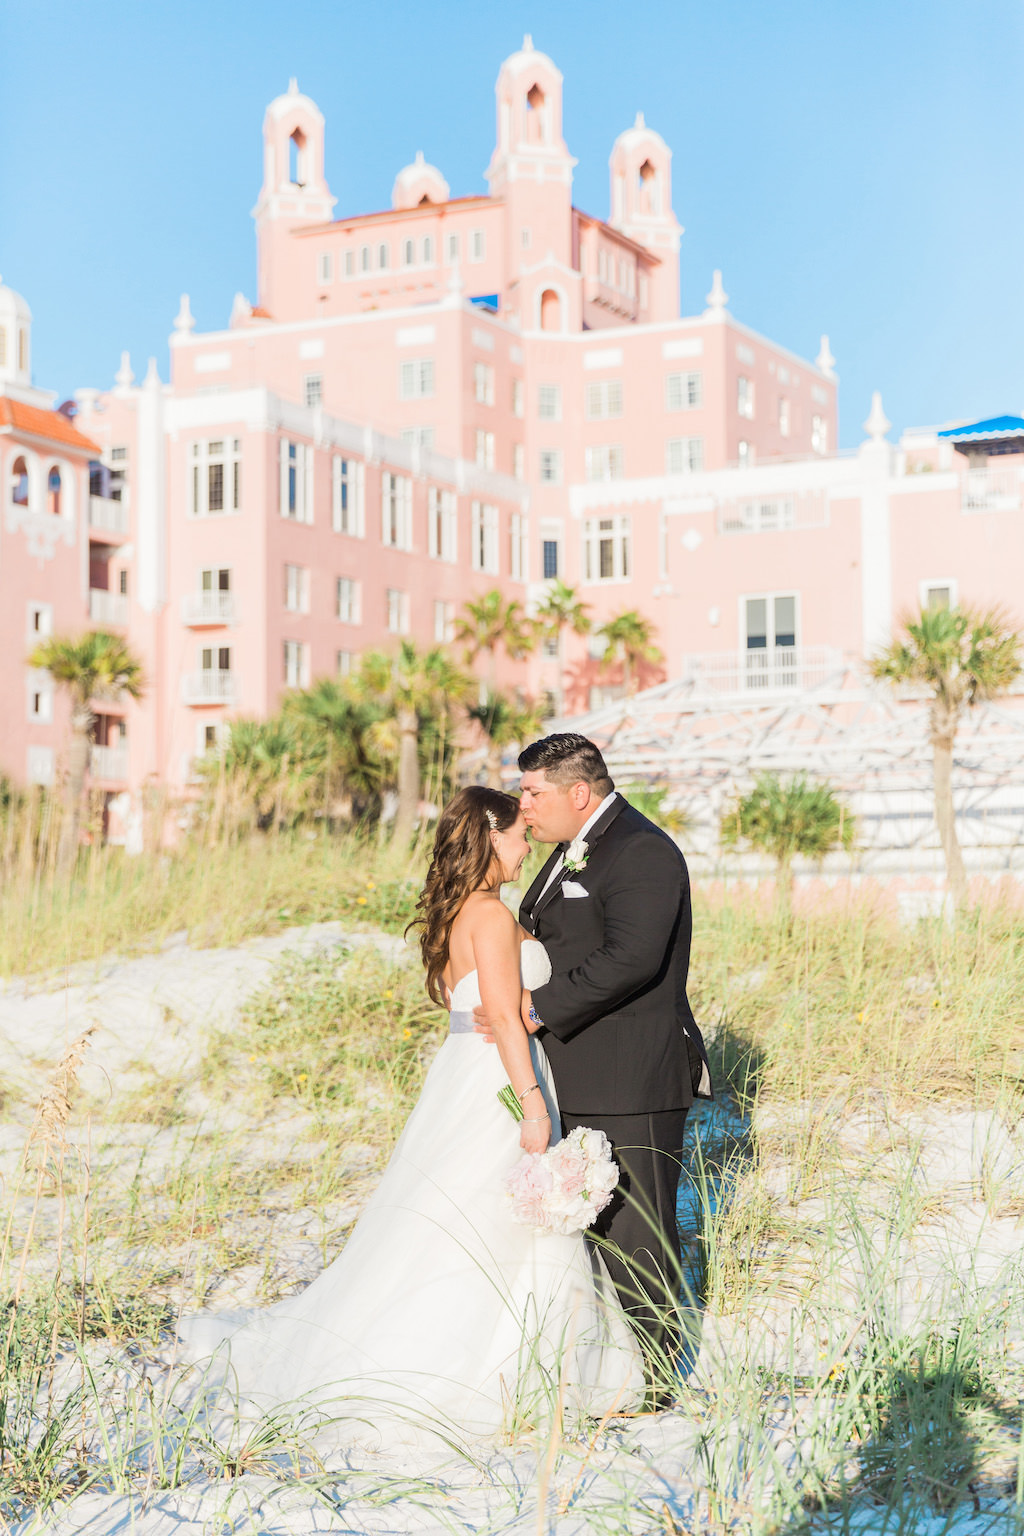 Outdoor Beach Bride and Groom Wedding Portrait in Ballgown Wedding Dress and Grey Sash with White and Pink Rose Bouquet, Groom in Black Tuxedo with White Floral Boutonniere | Historic St Pete Waterfront Hotel Wedding Venue The Don CeSar